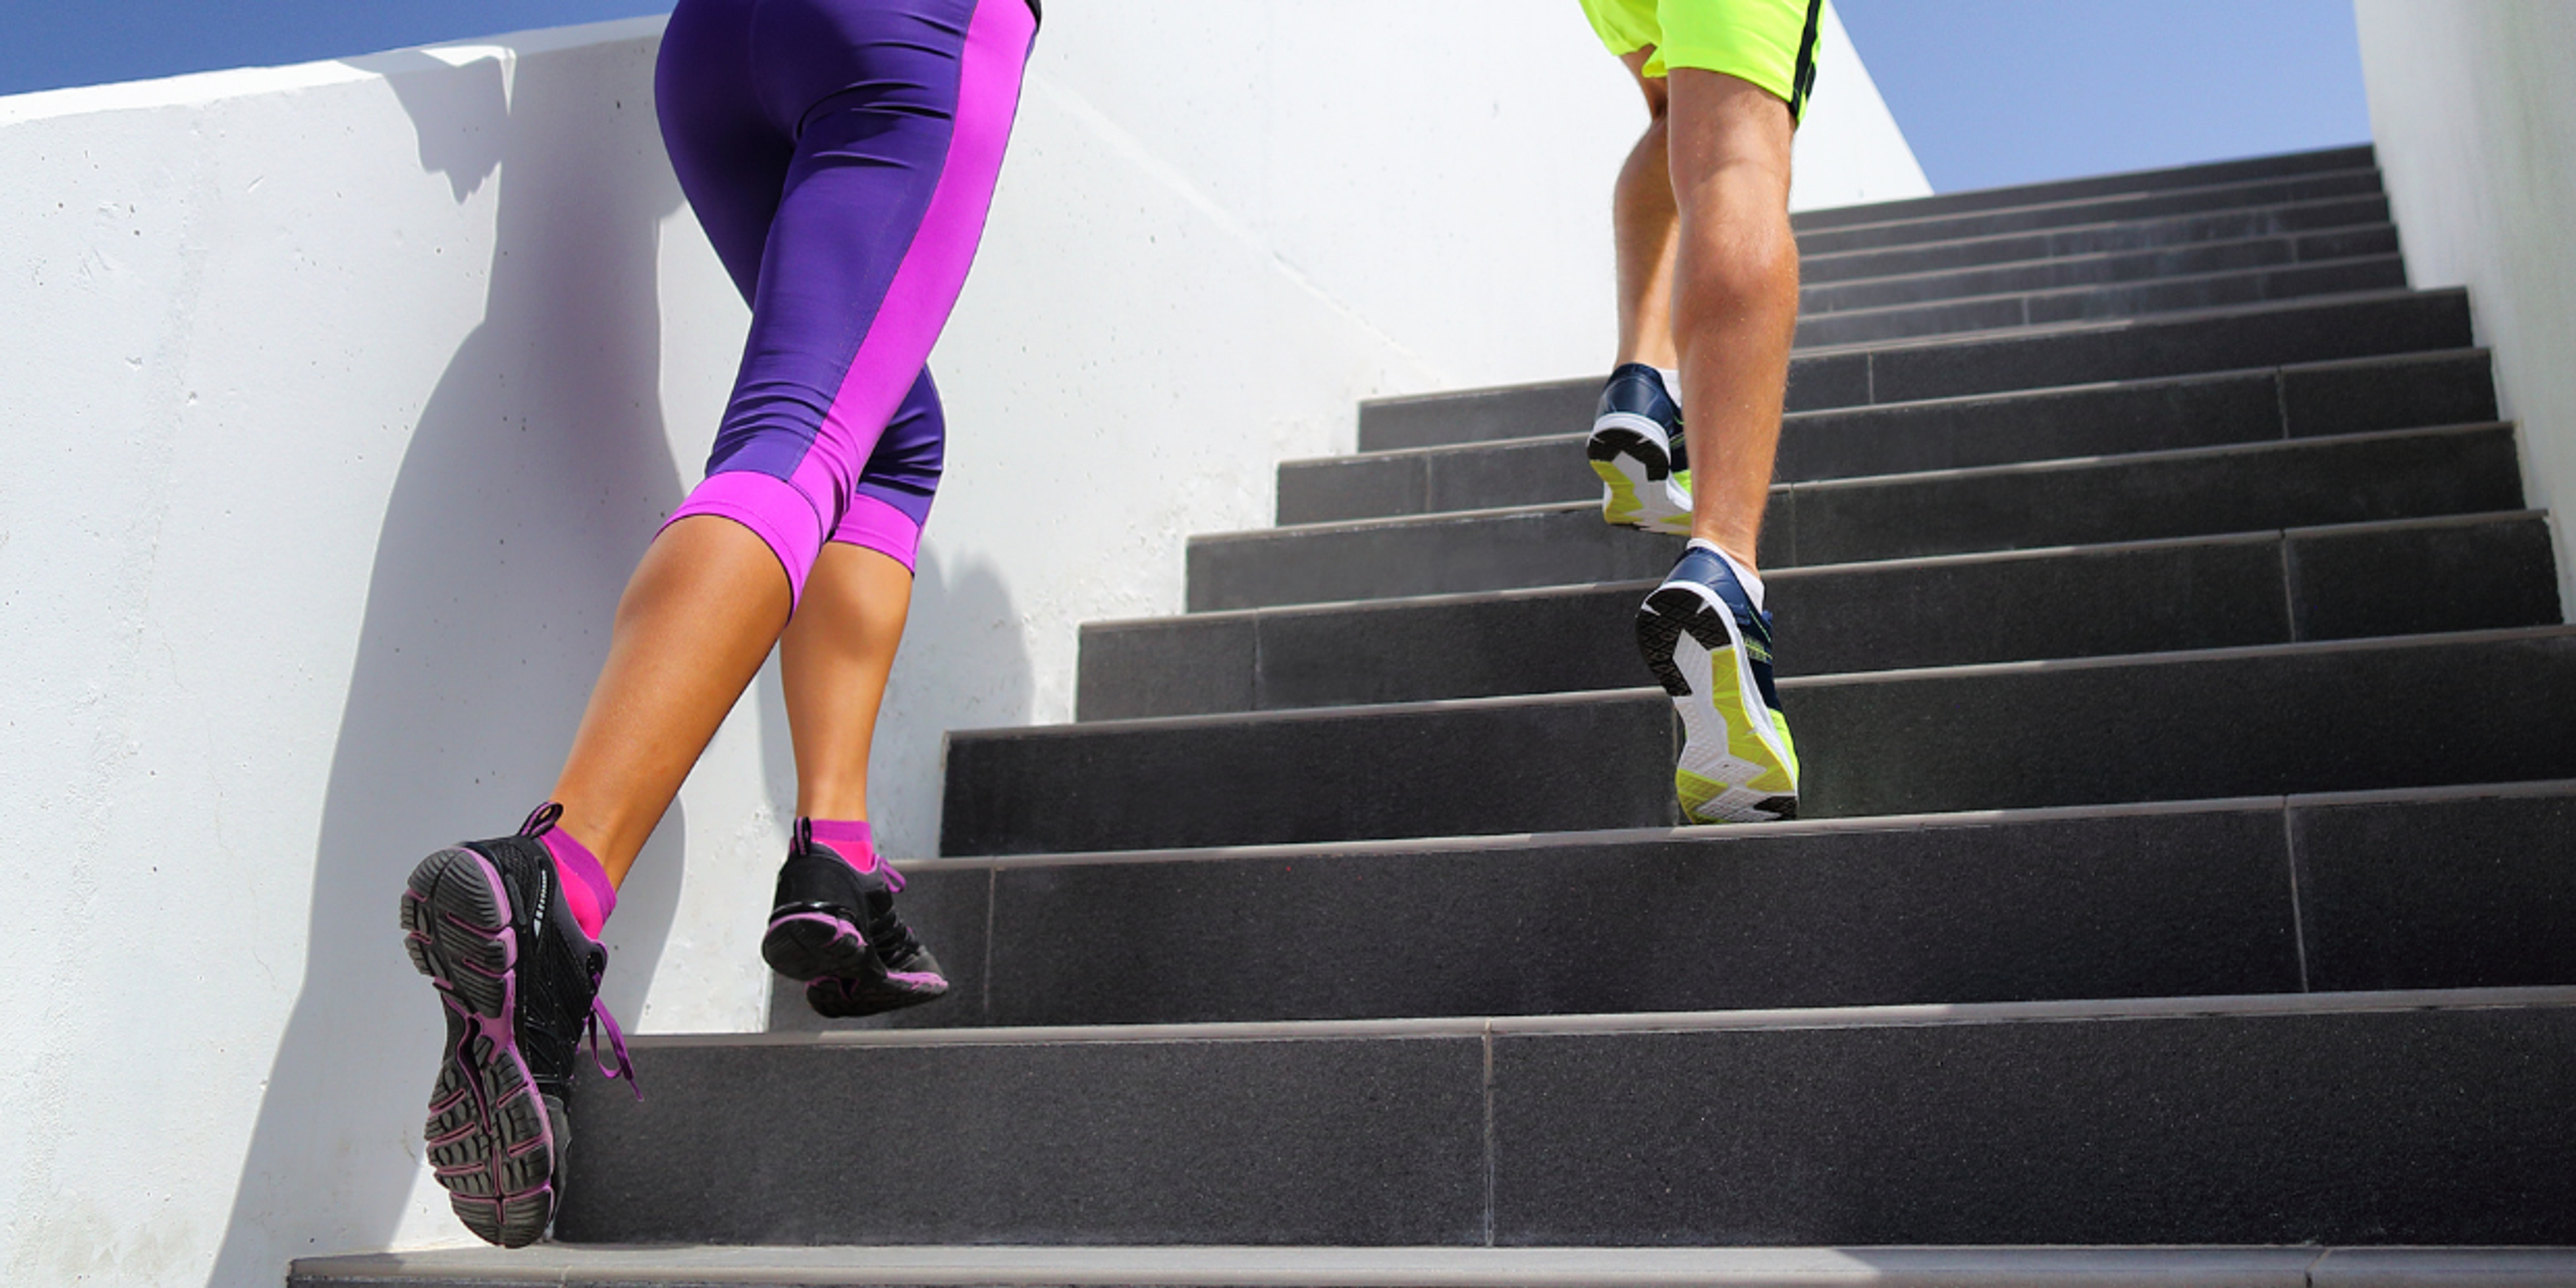 Good position sense allows you to climb stairs without looking at your feet.